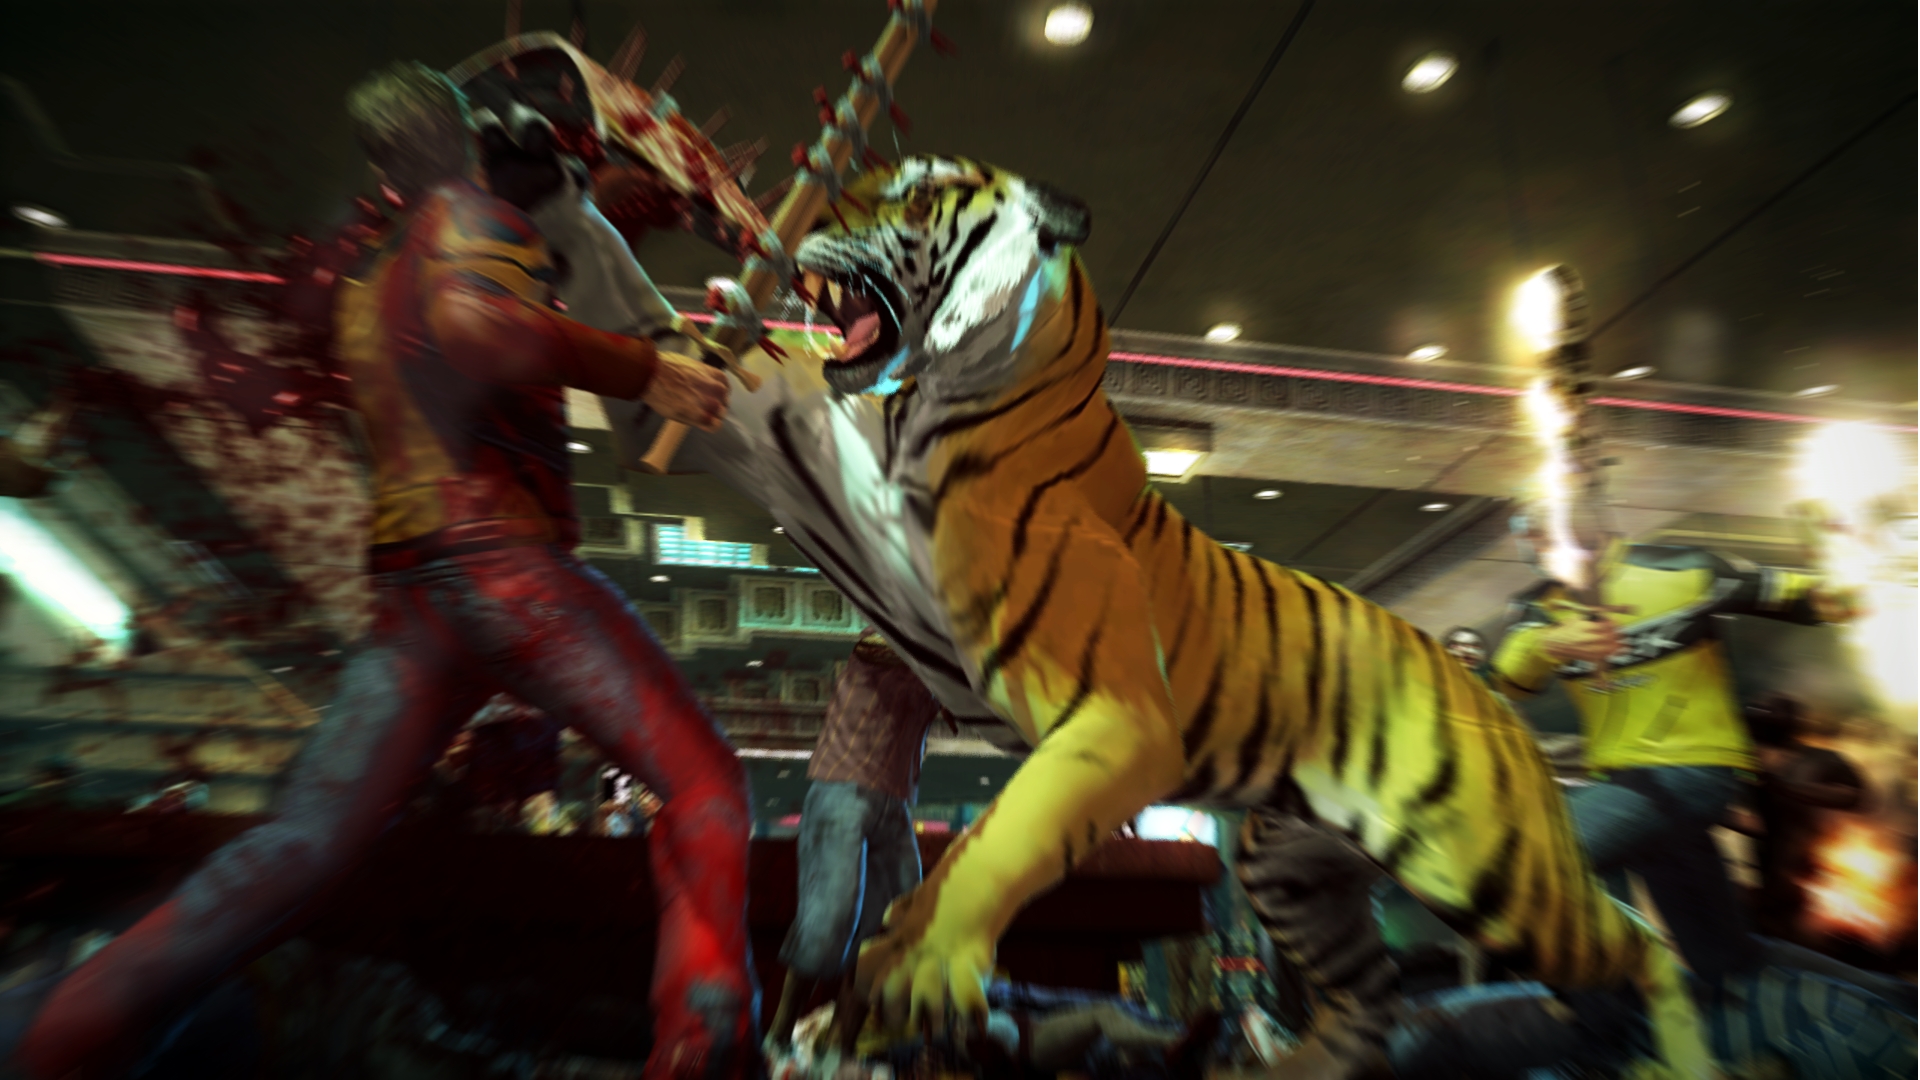 Dead Rising 2 - testing and system requirements PC